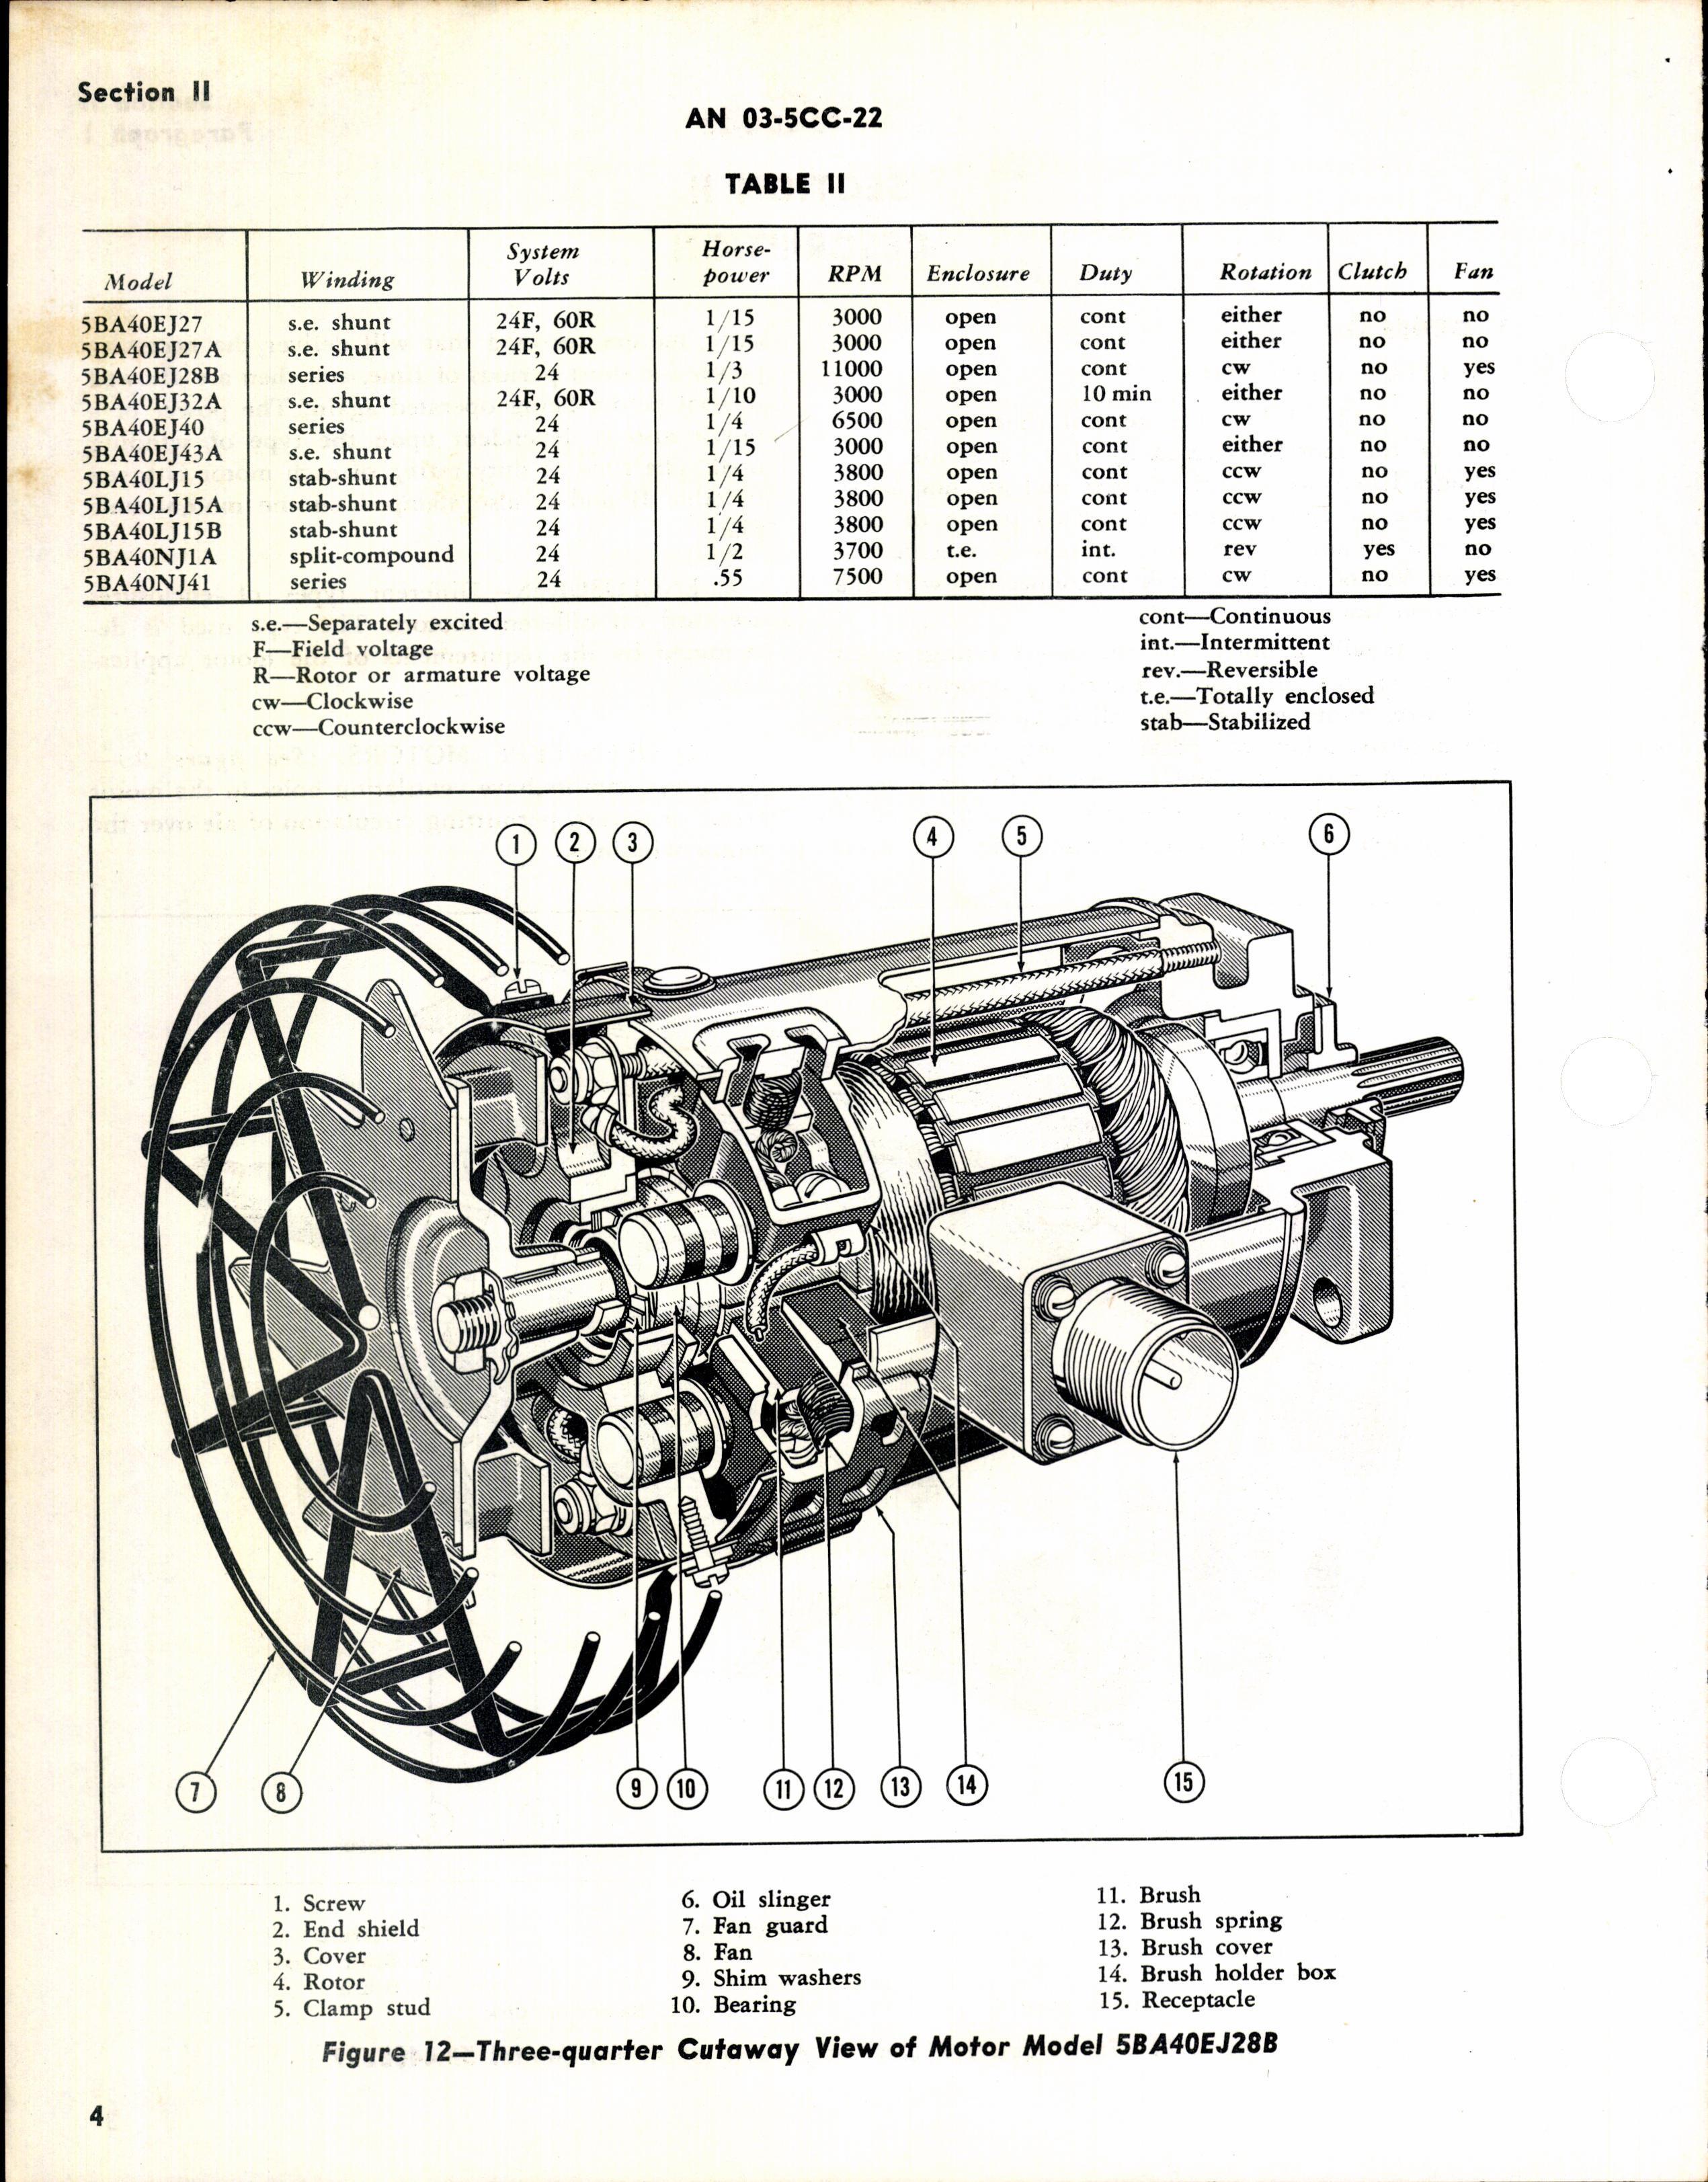 Sample page 6 from AirCorps Library document: Handbook of Instructions with Parts Catalog for Model 5BA50 Series Electric Motors